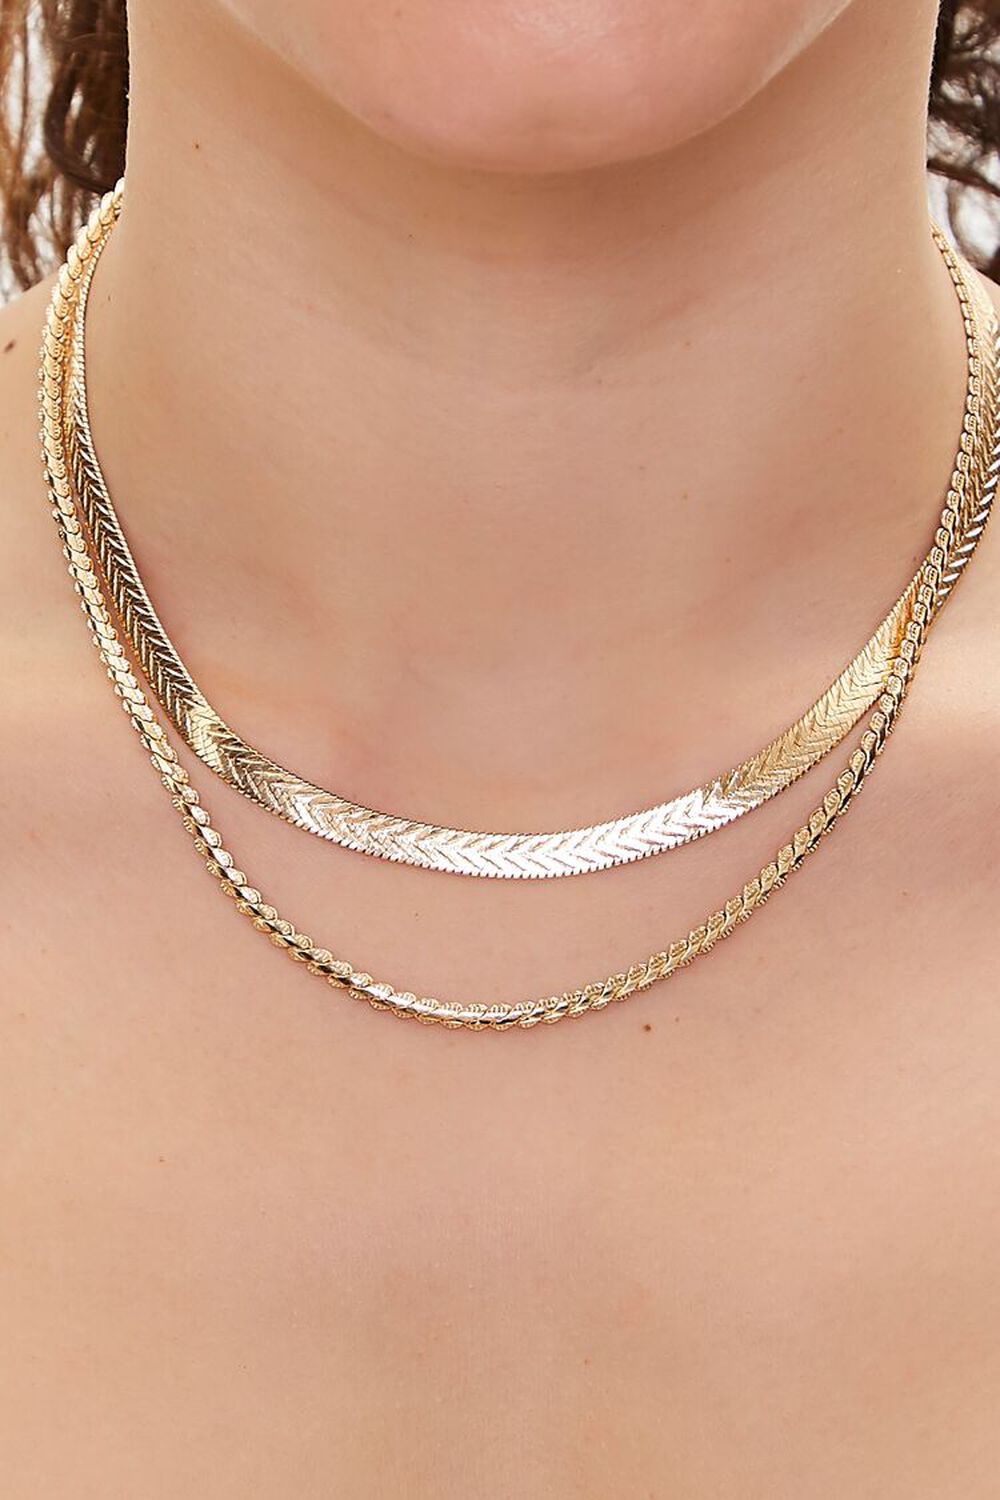 GOLD Serpentine Layered Necklace, image 1